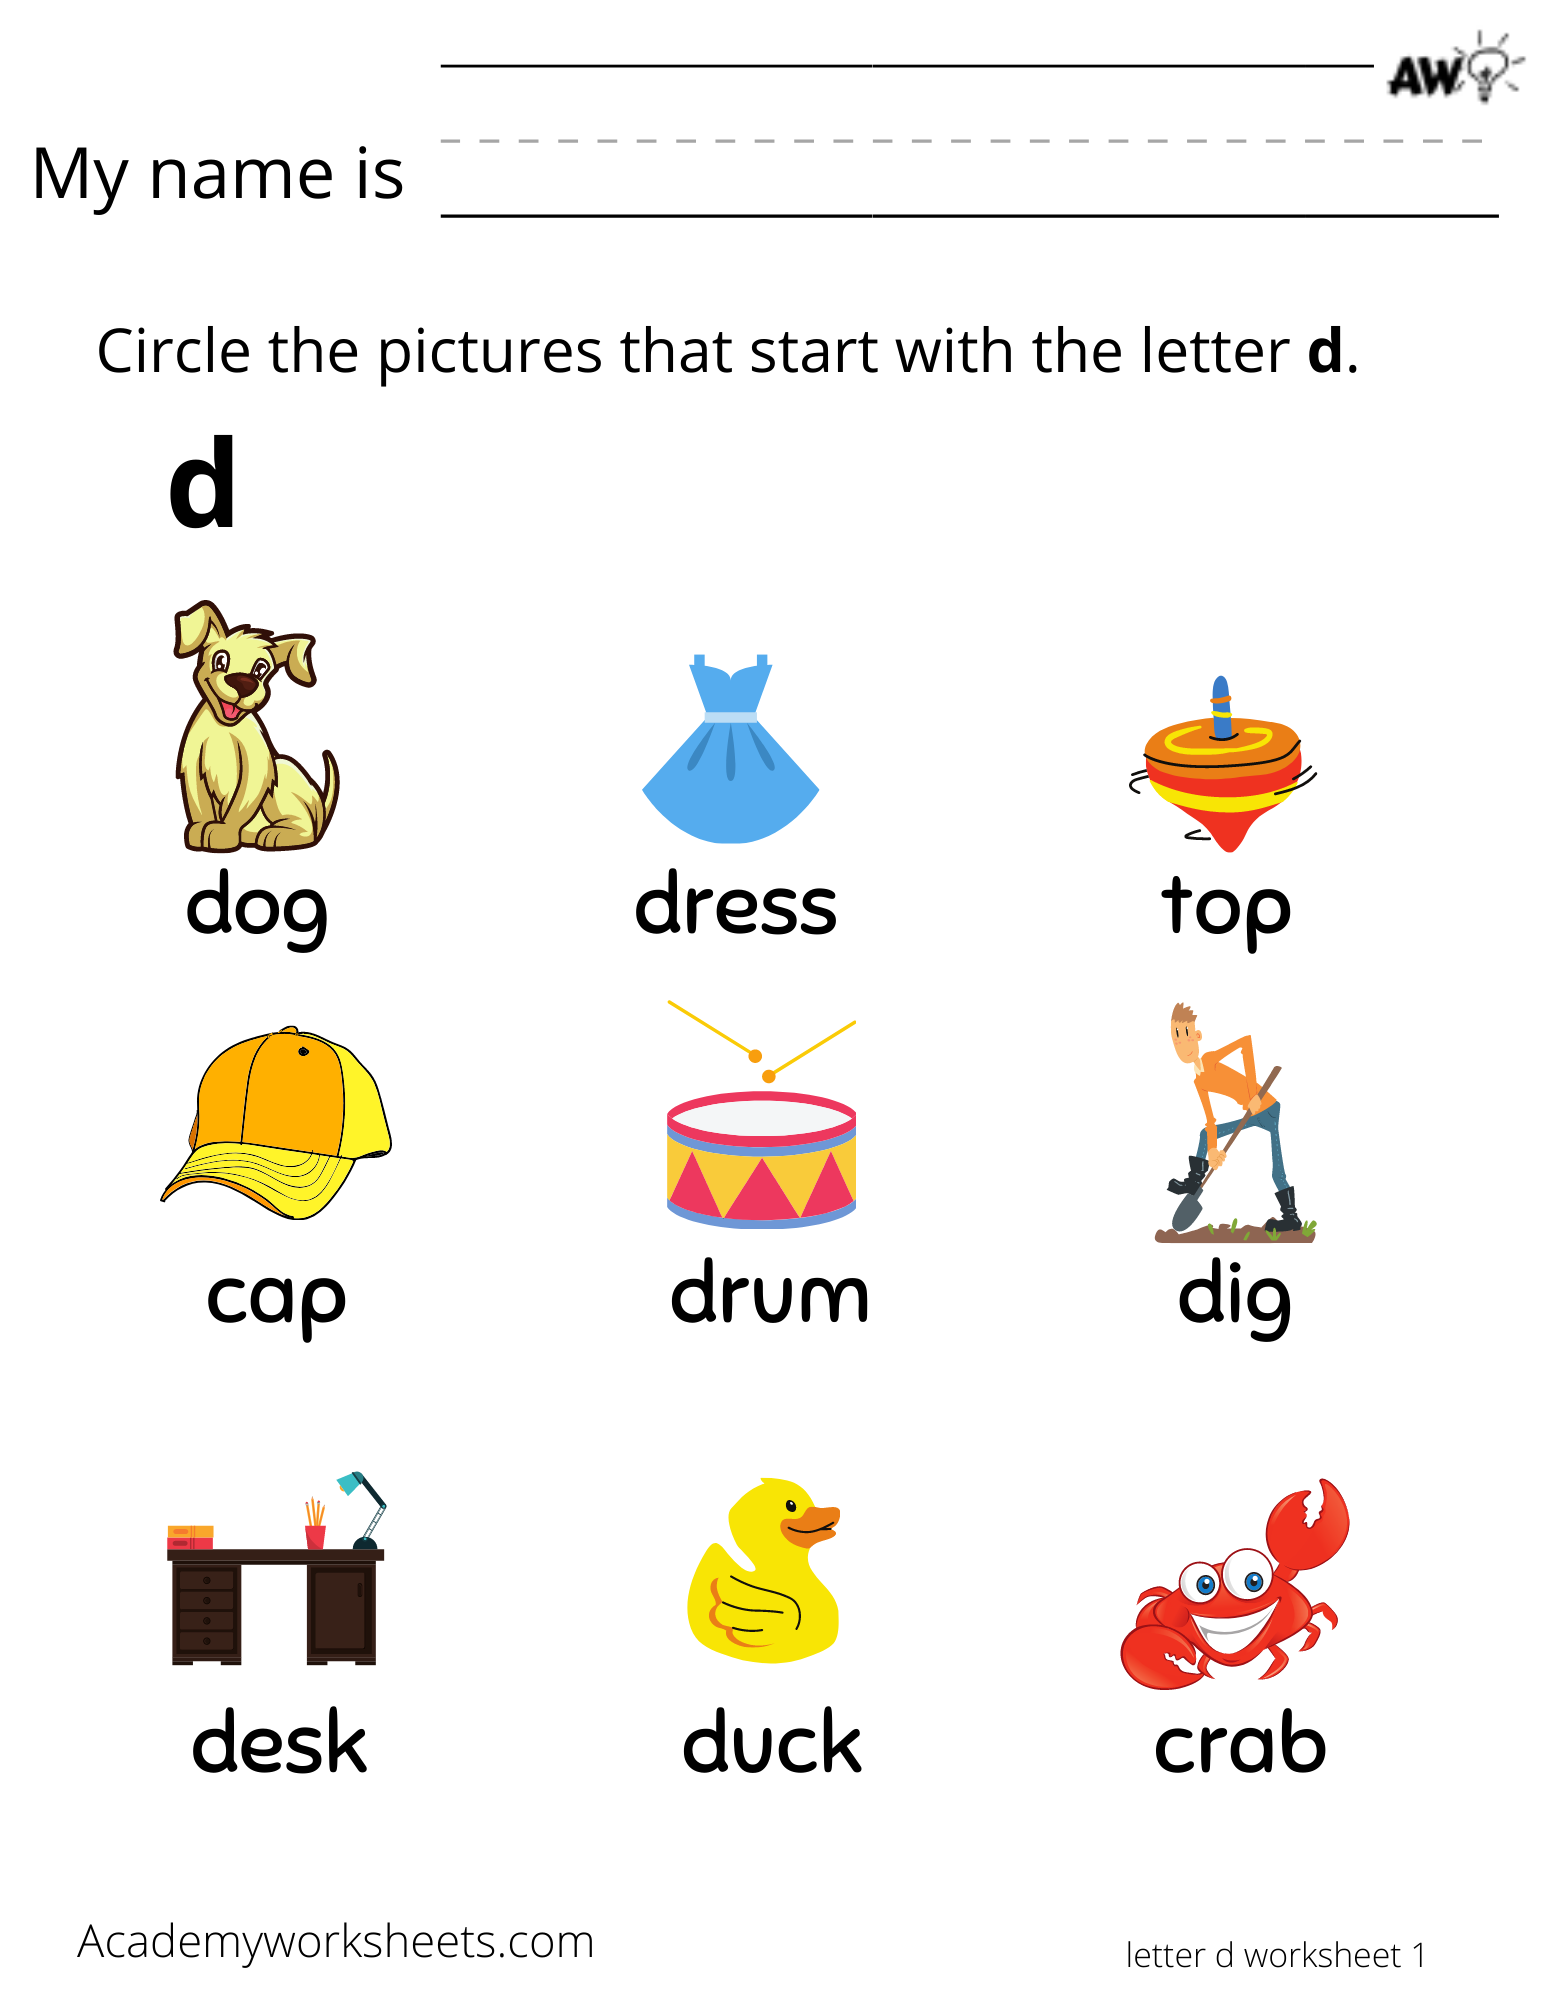 copy-of-literacy-introduction-of-lowercase-letter-d-23-09-21-lessons-blendspace